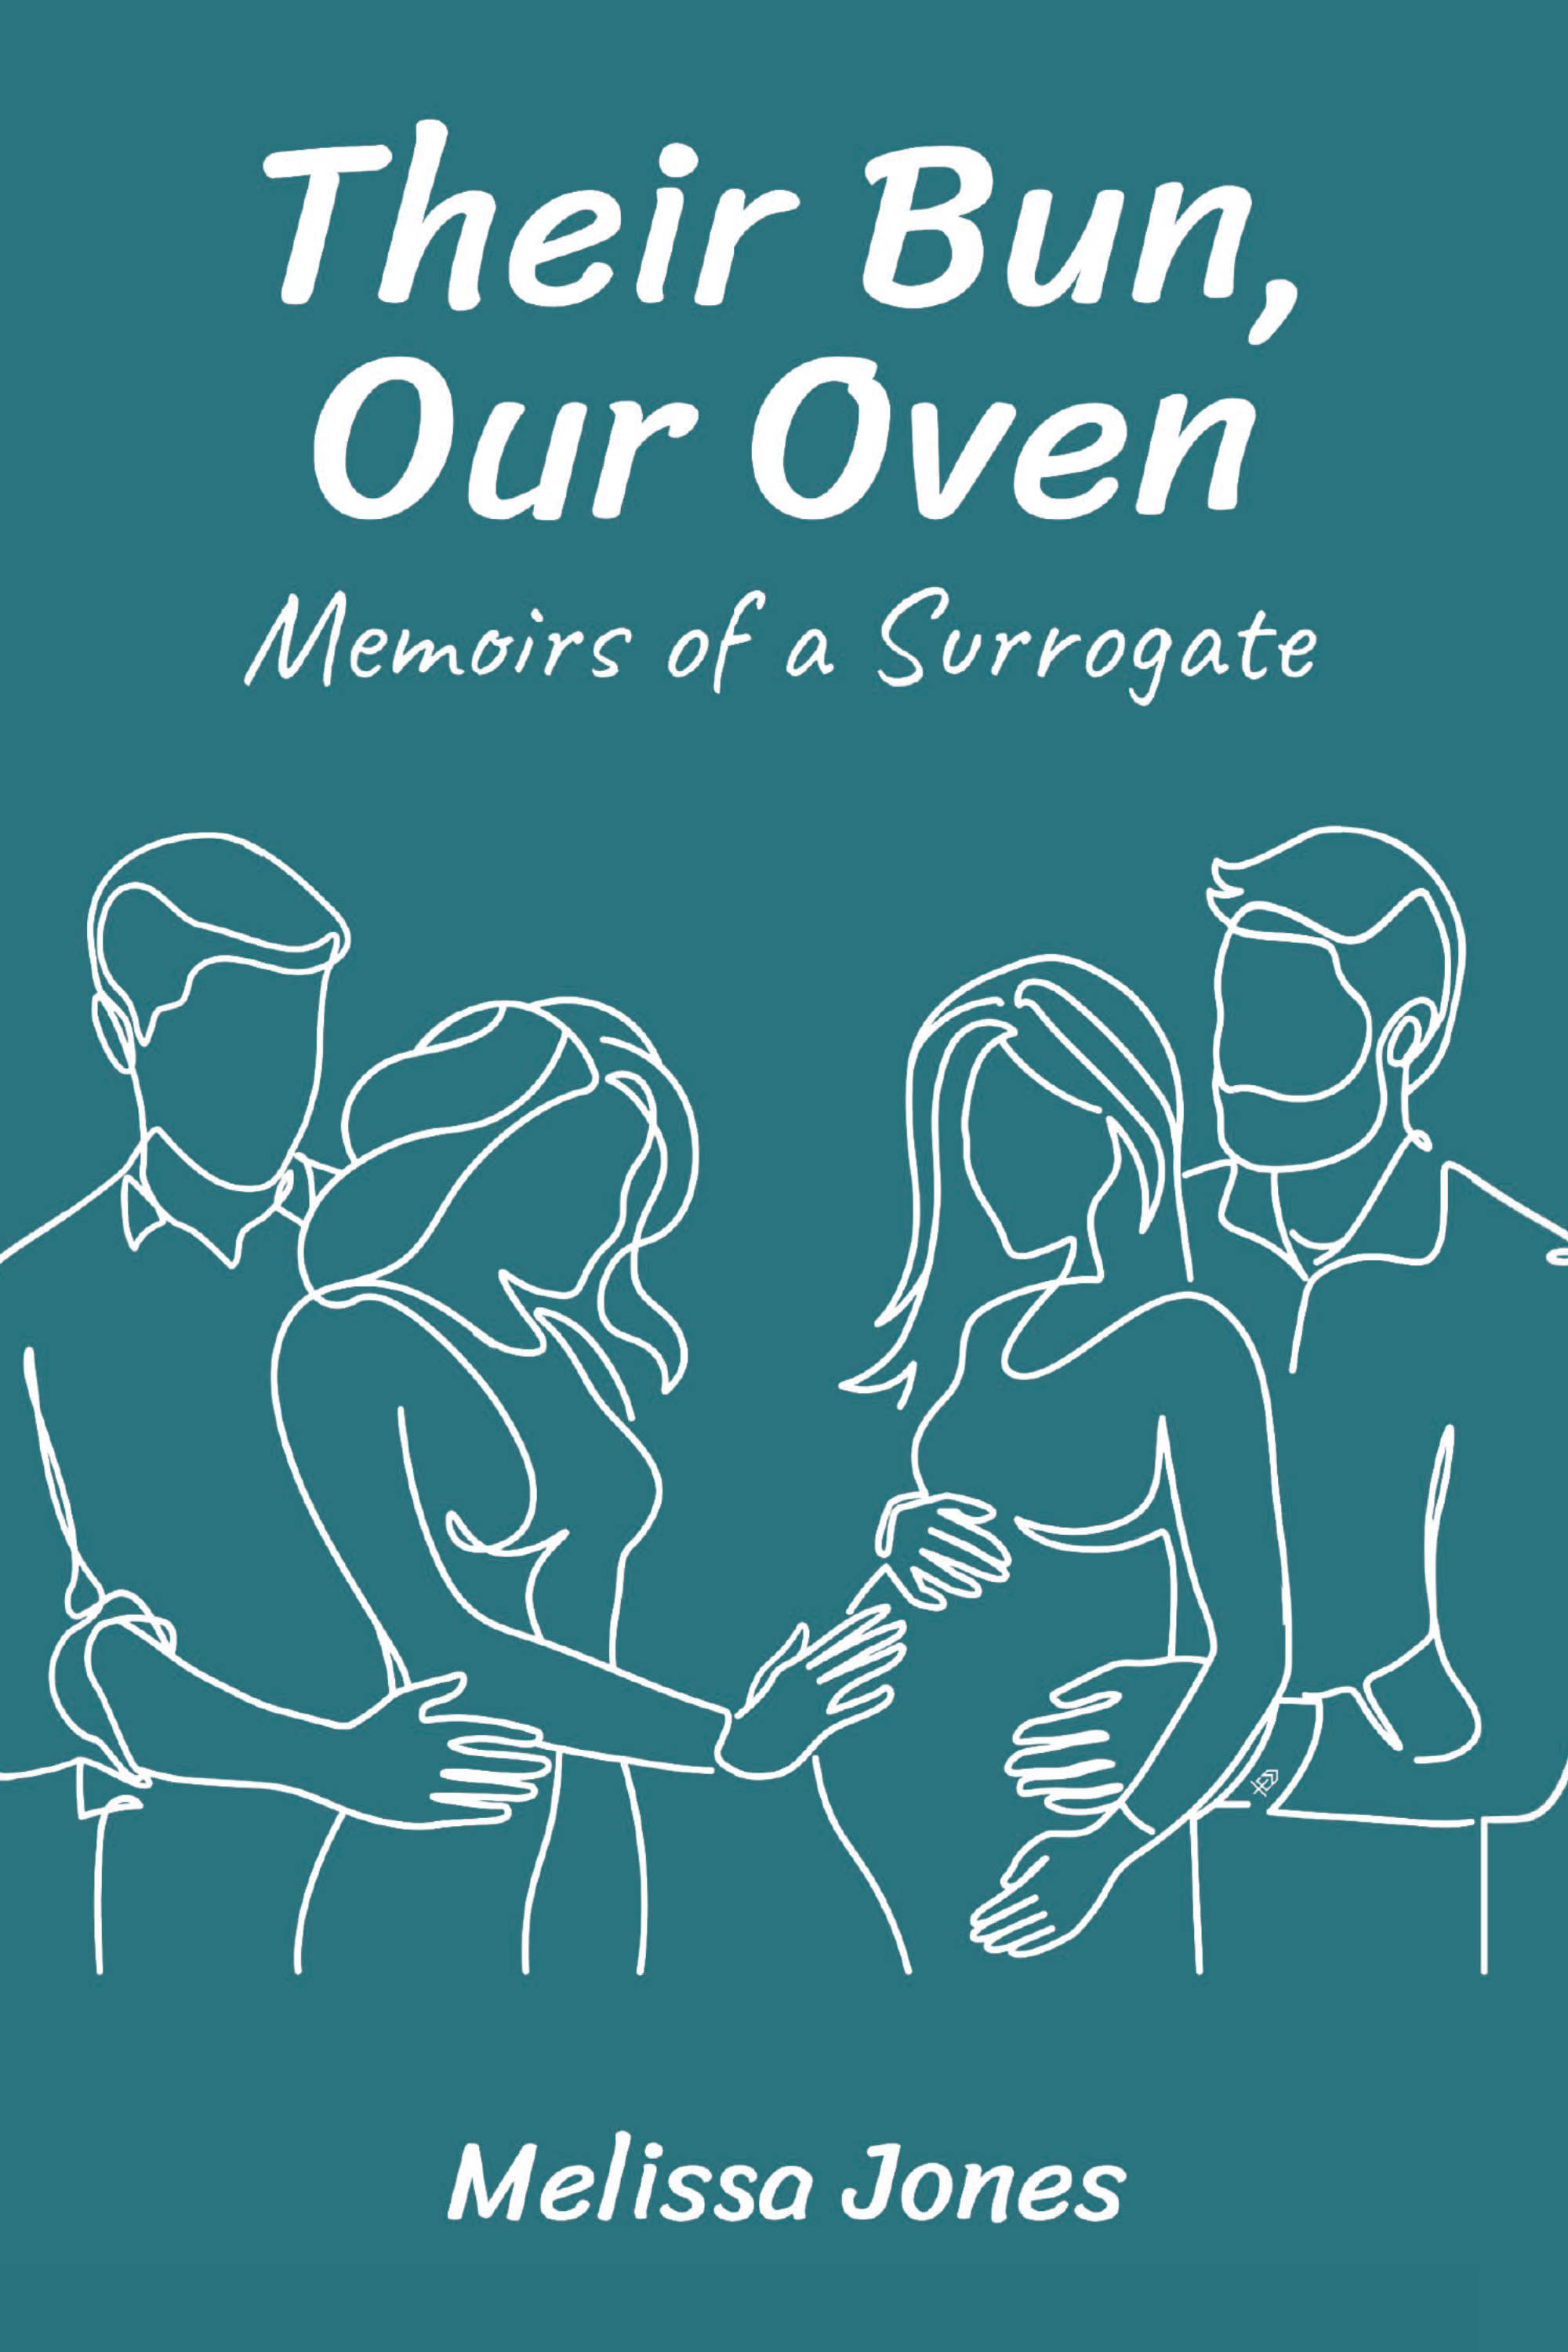 Author Melissa Jones’s New Book, "Their Bun, Our Oven," Follows the Author and Her Family Through Her Journey of Becoming a Surrogate and Fulfilling a Lifelong Calling